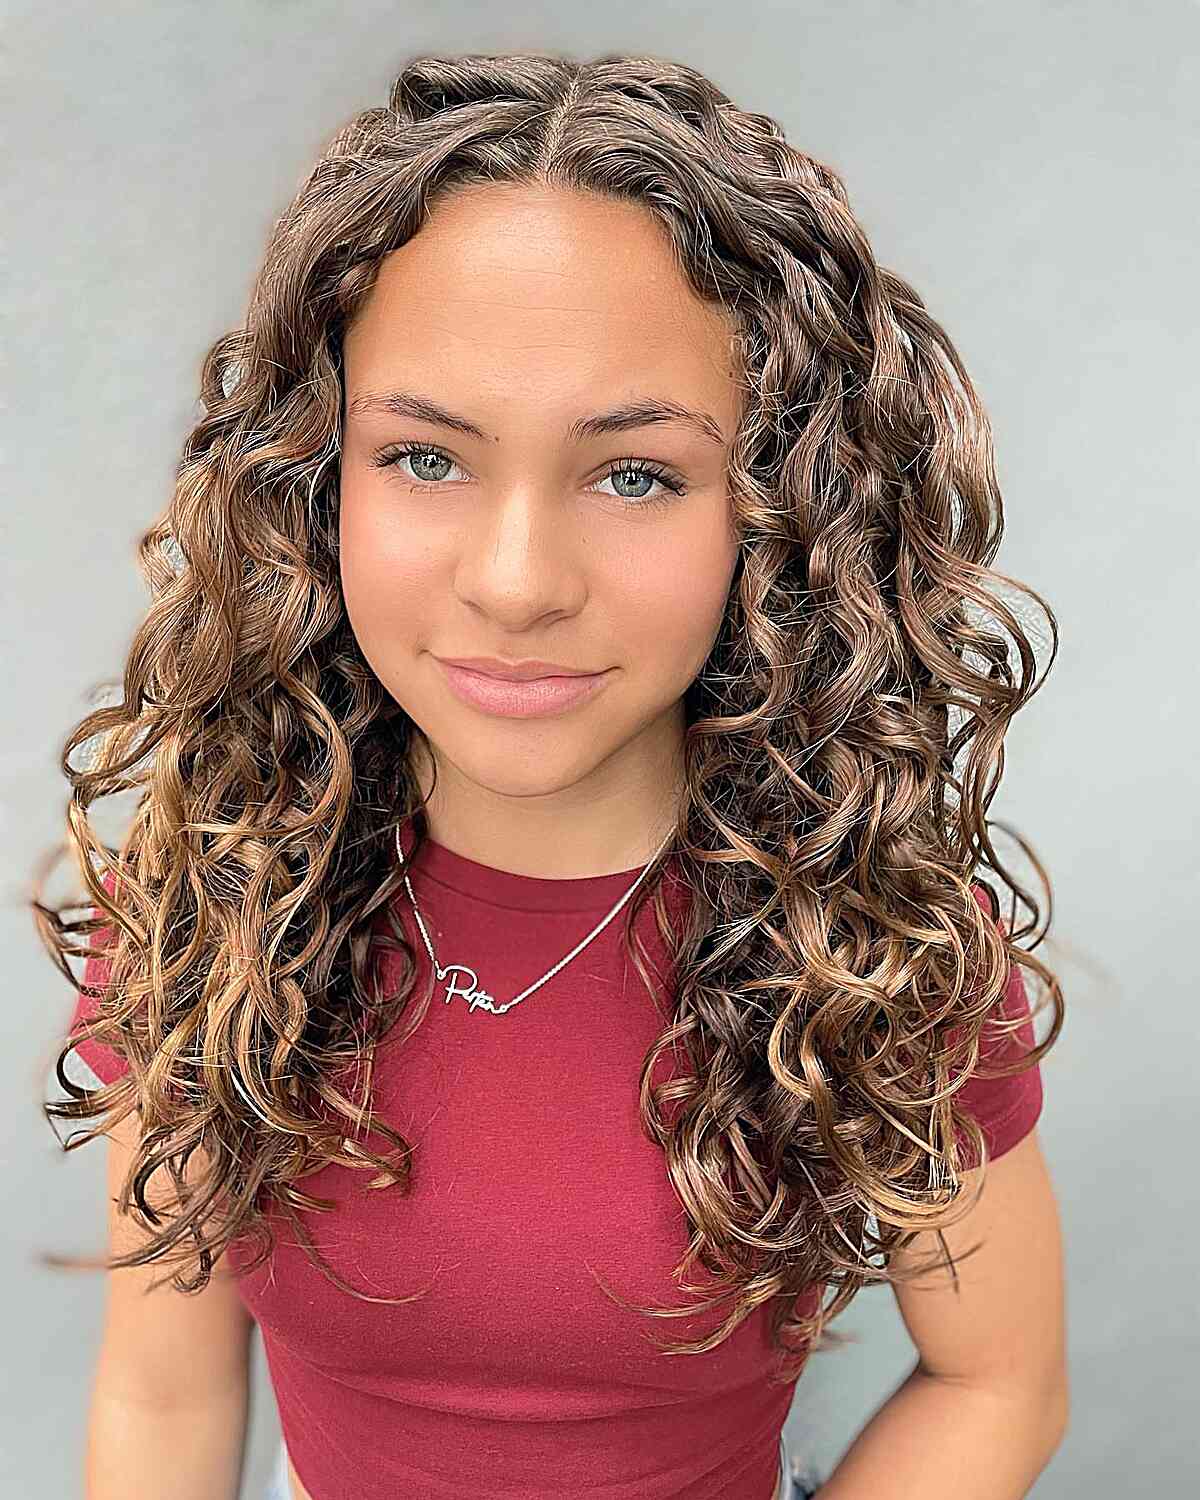 The Cutest Long Curly Hairstyle for Teens at School